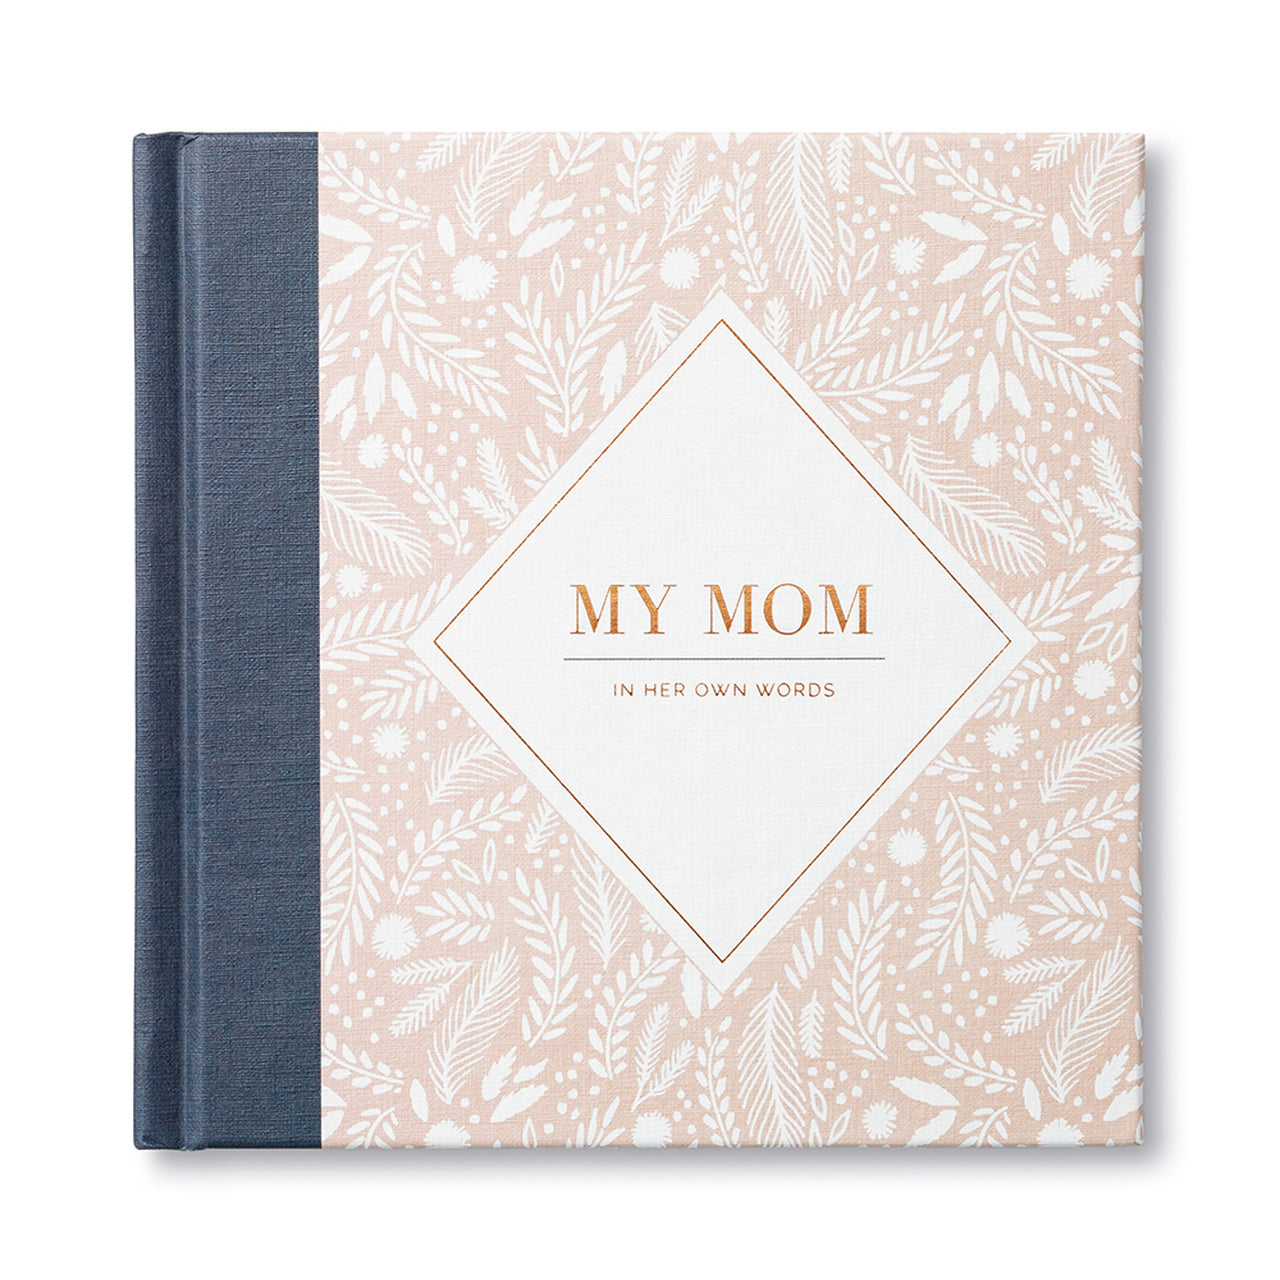 "Mom" Life Stories Book